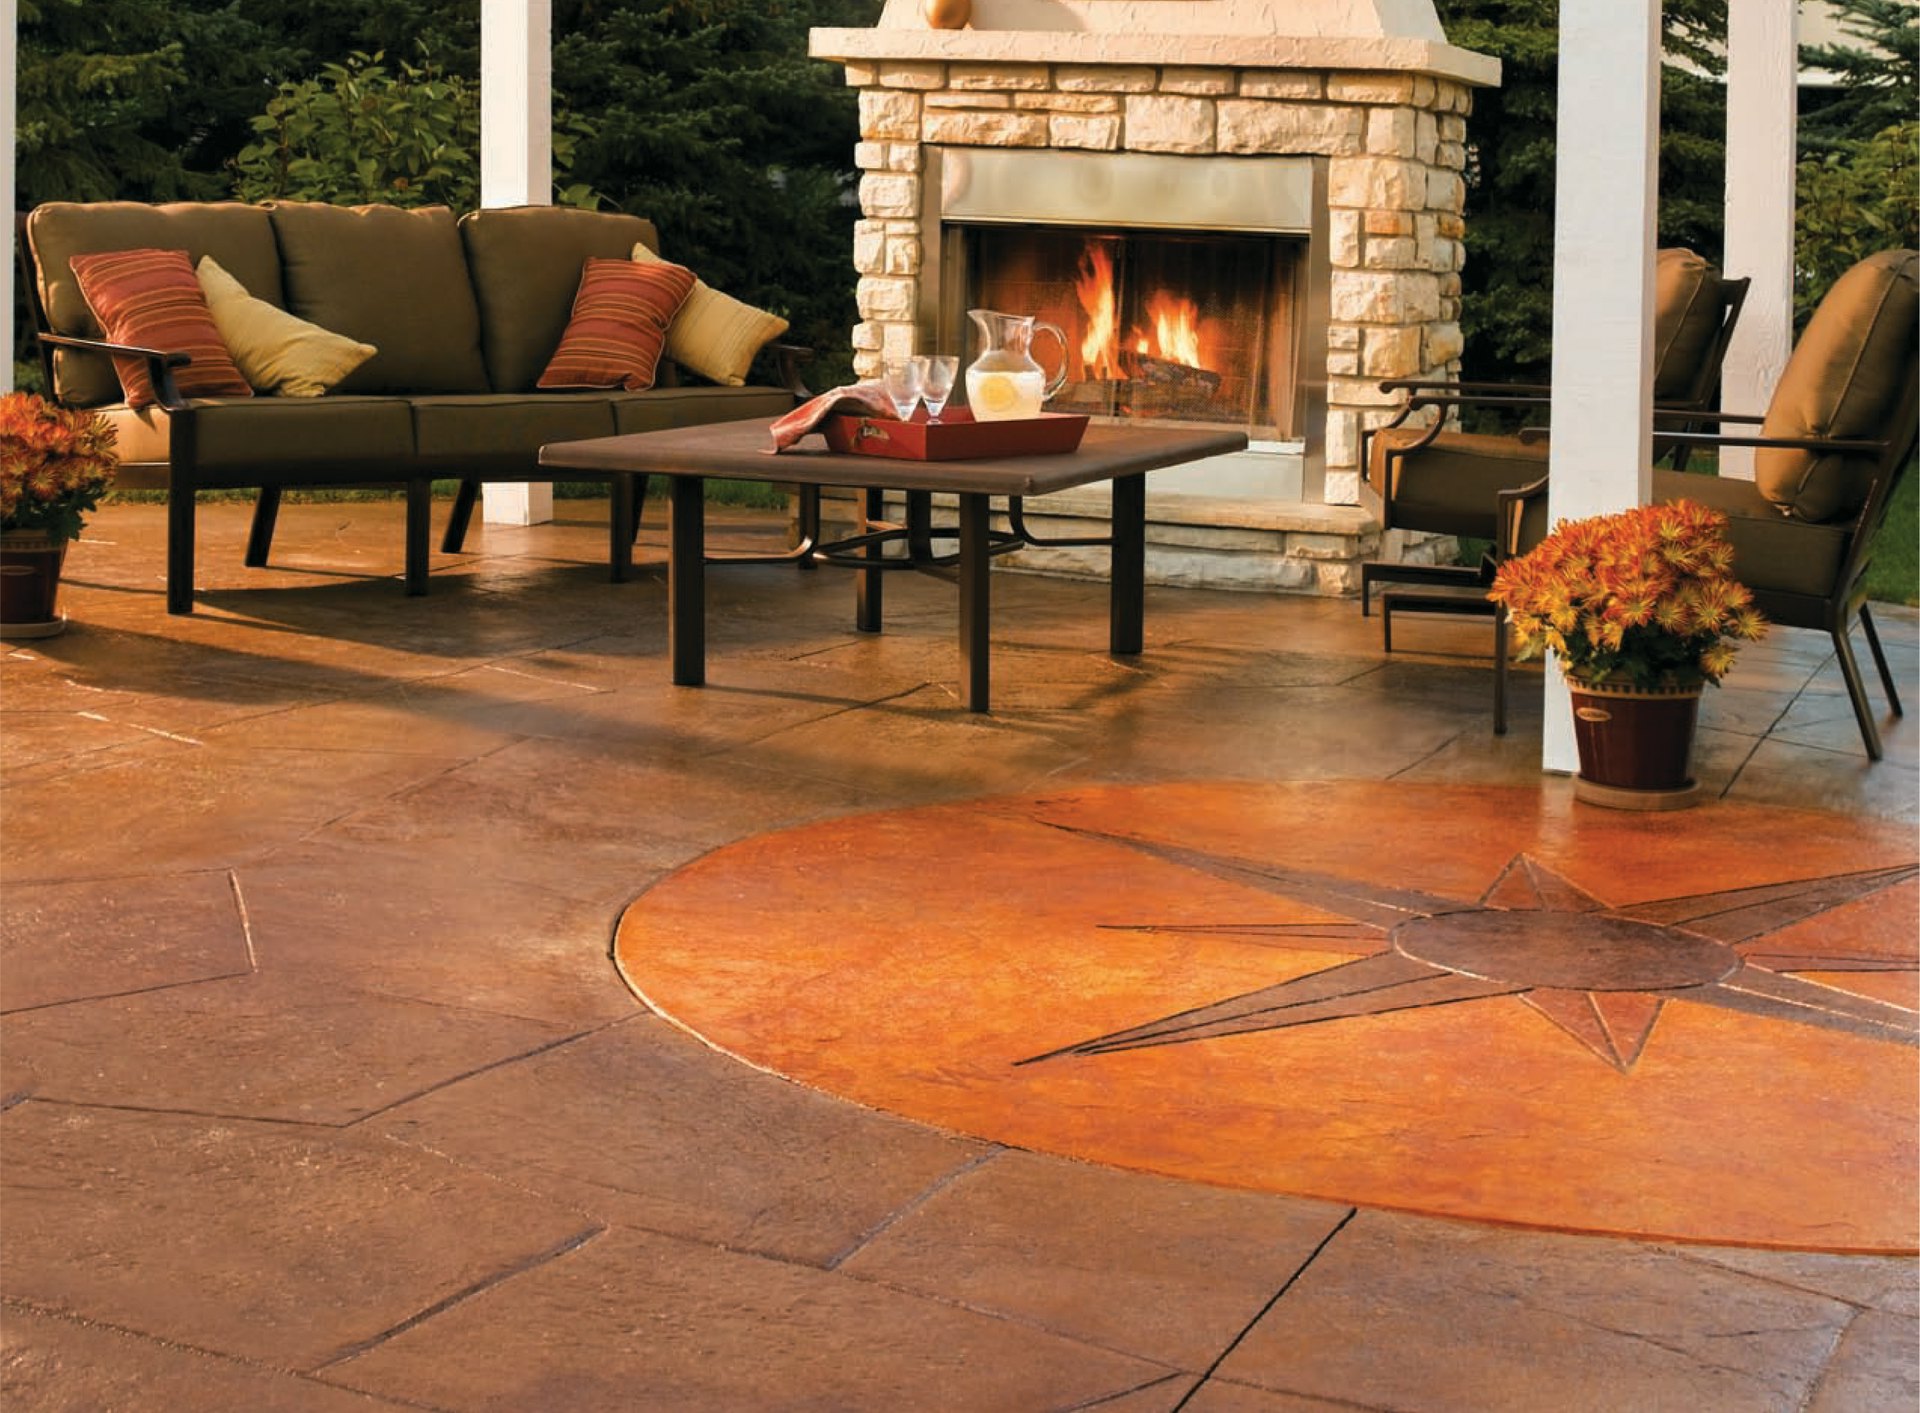 HERE'S HOW: Add color to the surface of your concrete patio